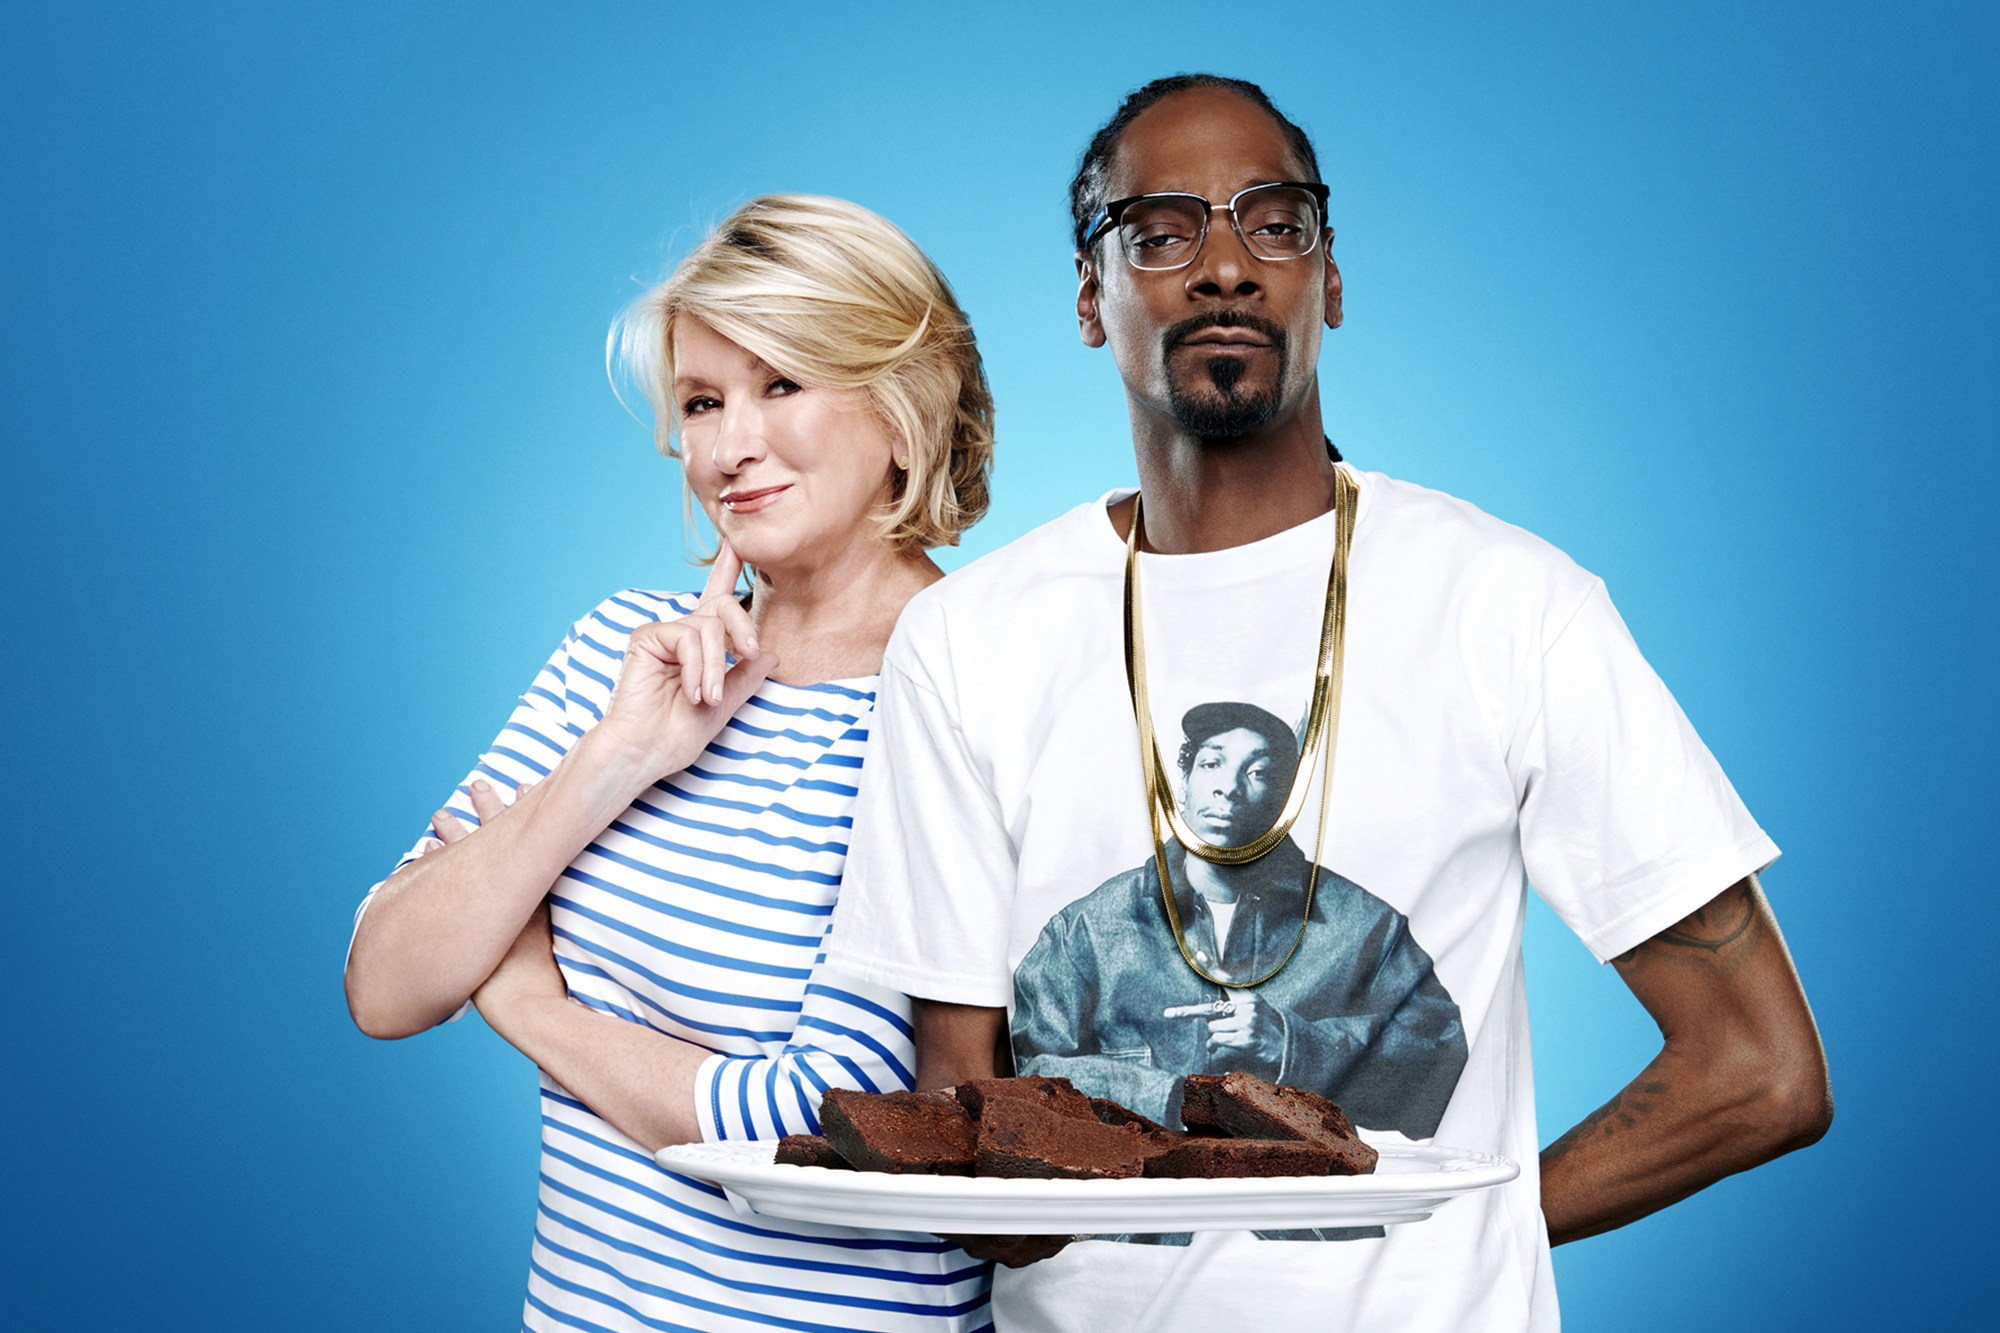 Martha Stewart and Snoop Dogg's Cooking Show Actually Looks Really Entertaining